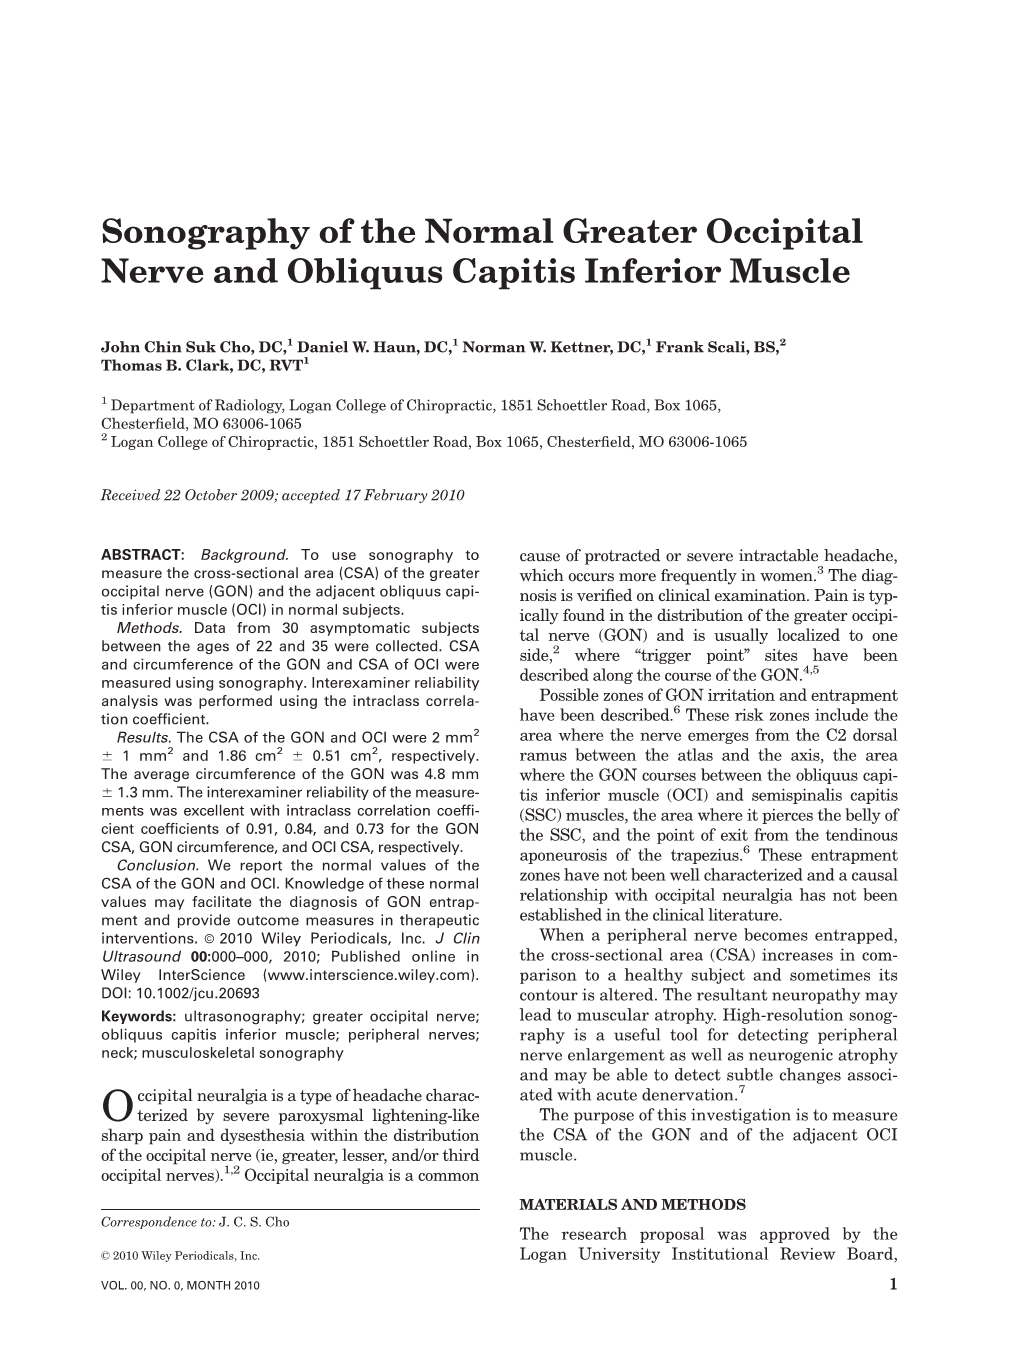 Sonography of the Normal Greater Occipital Nerve and Obliquus Capitis Inferior Muscle